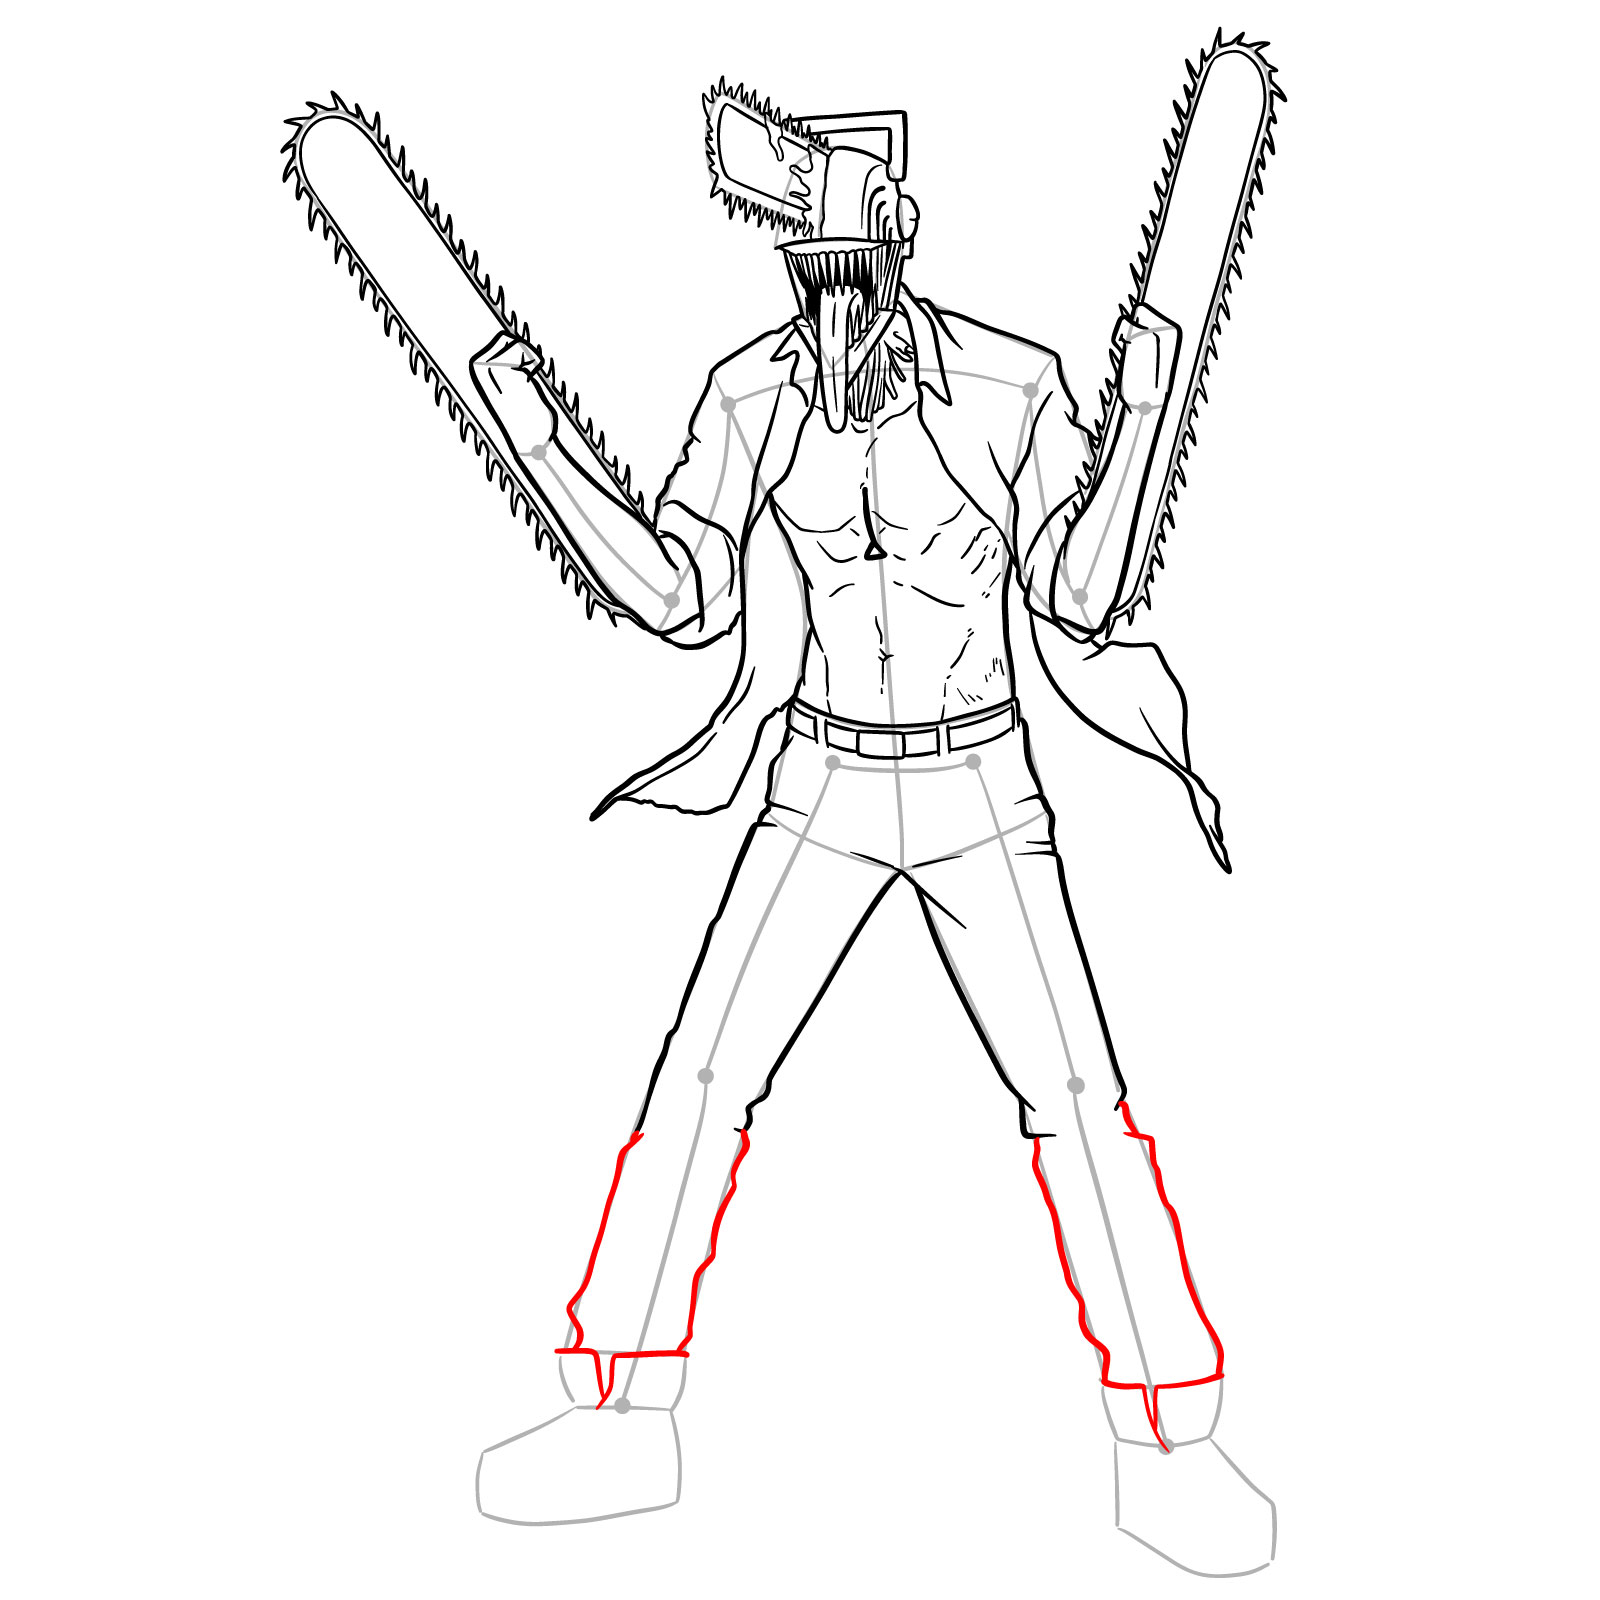 A continuation of the drawing, extending the pants from the knees to the ankles, including the upper part of the sneakers - step 26